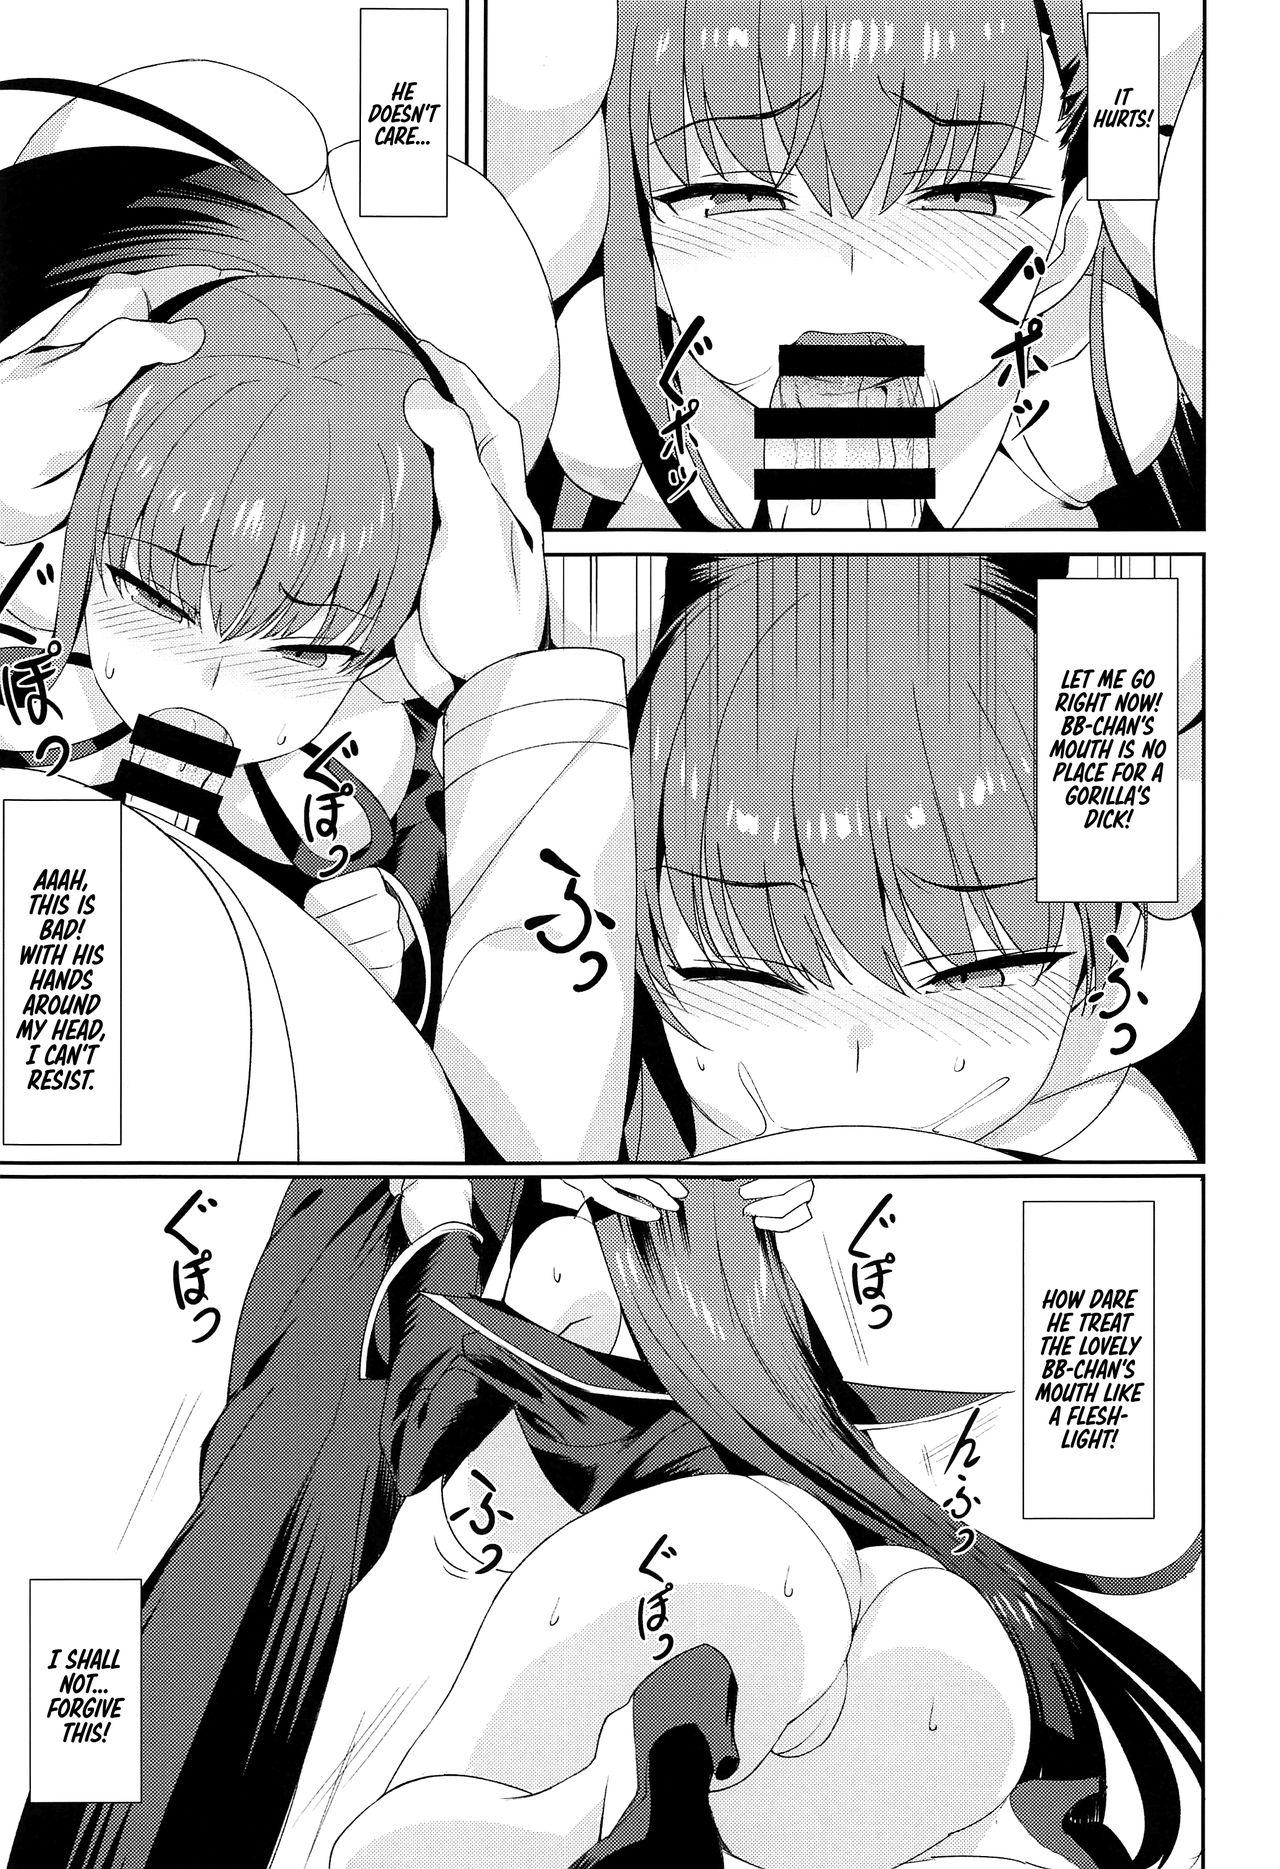 Plump Namaiki | Cheeky - Fate grand order Blowjob Contest - Page 6